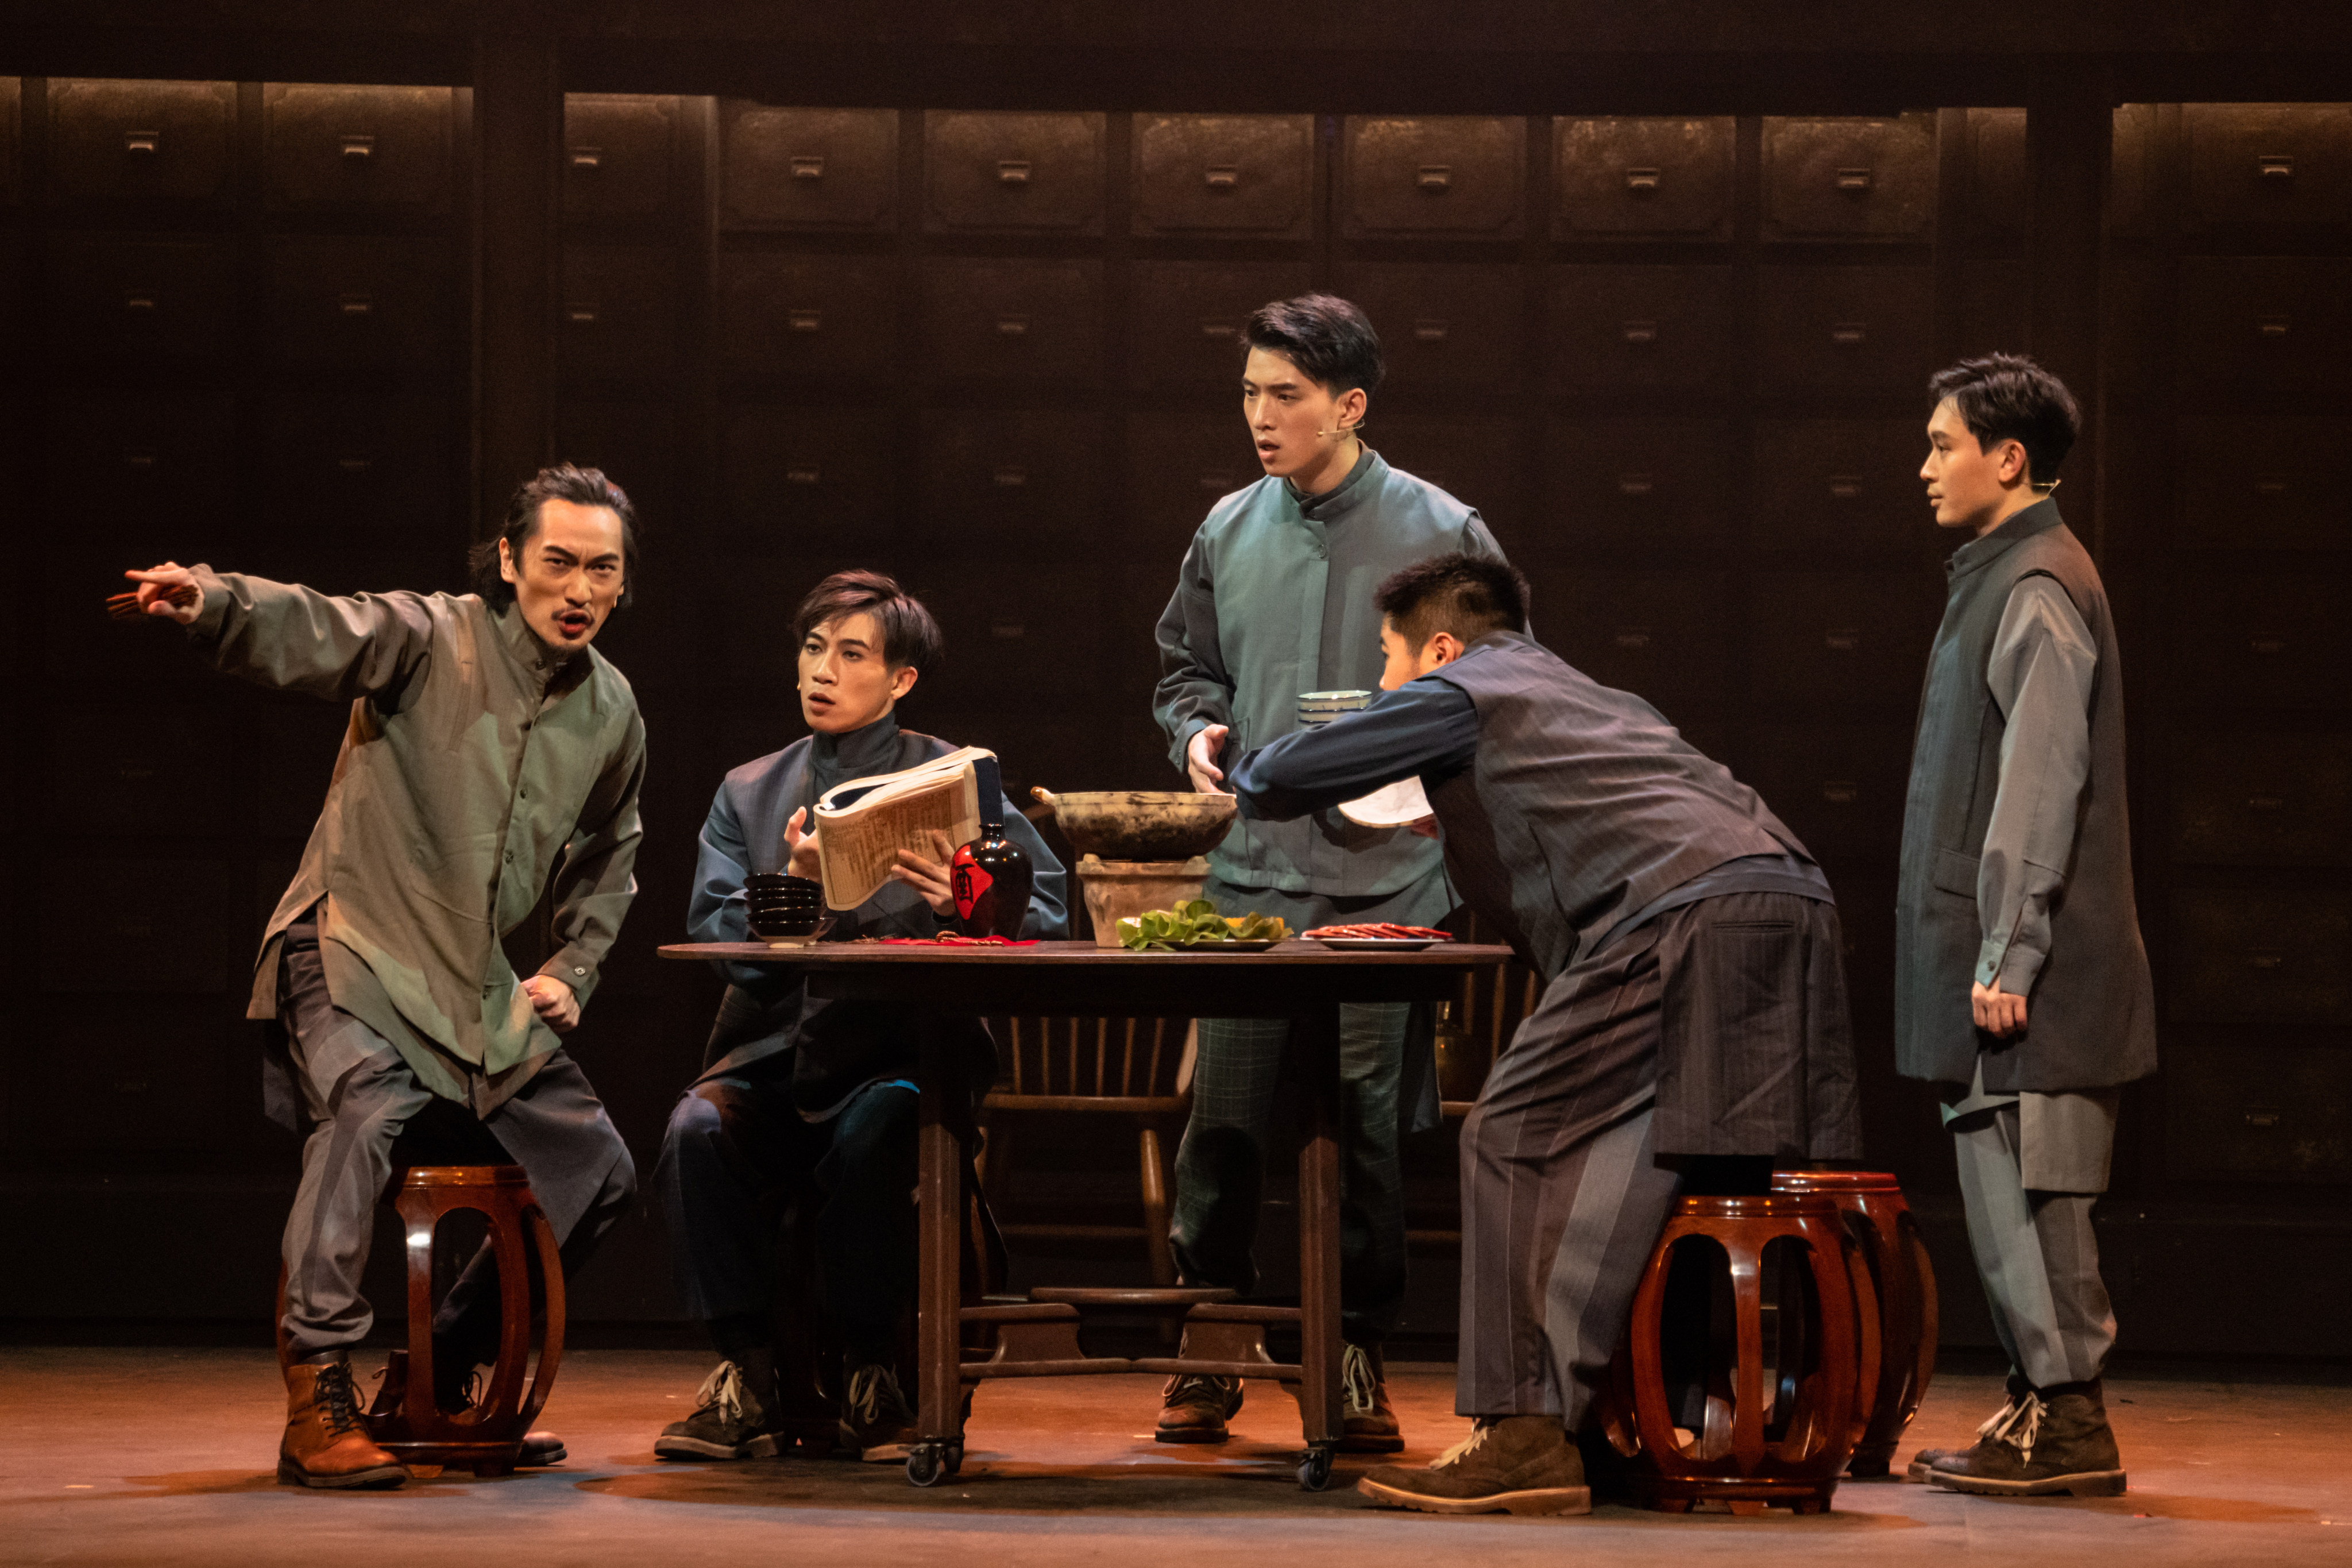 A scene from Yat-sen featuring the “Four Bandits” influential in the 1911 Chinese revolution. The musical showcases impressive Hong Kong talent, but is tainted by its chauvinistic interpretation of history.  Photo: Carmen So